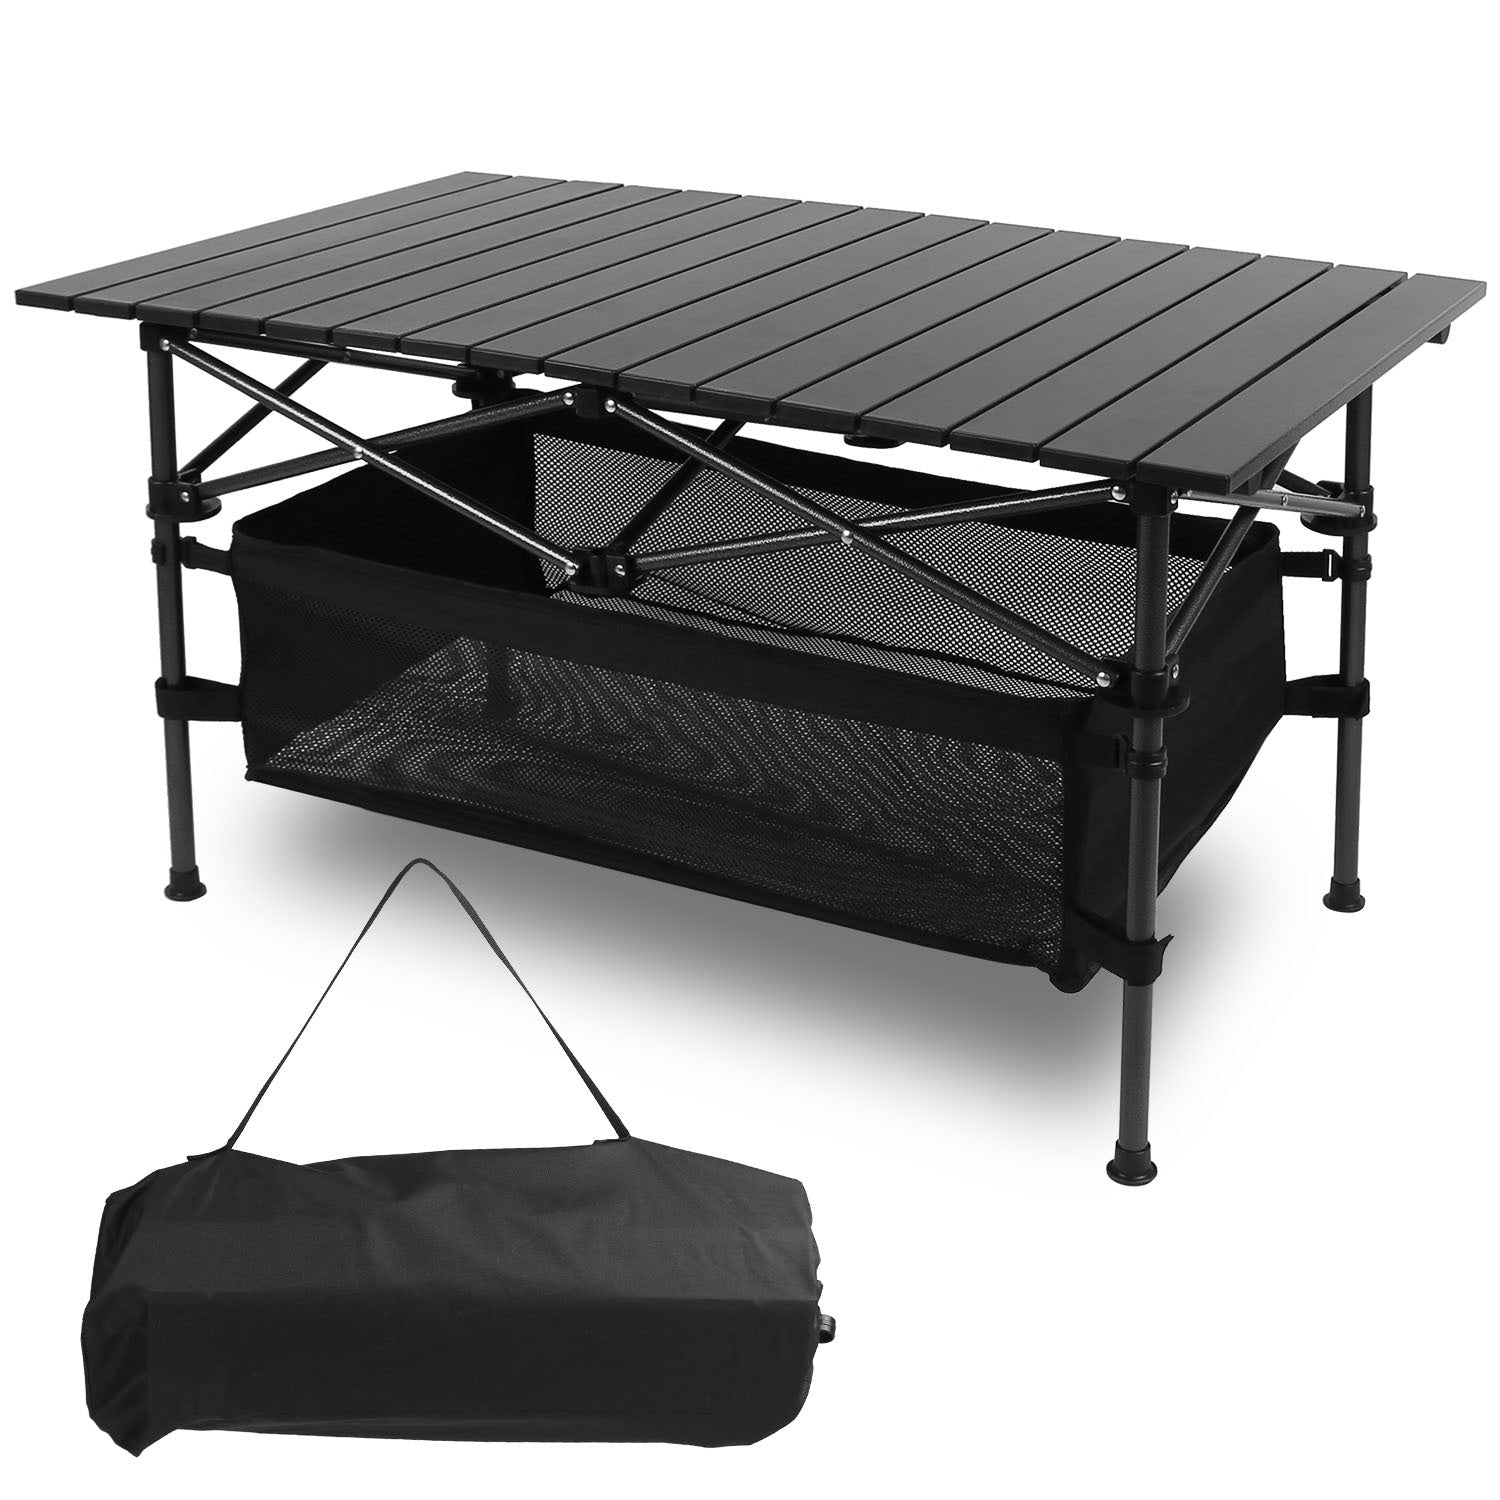 Portable and Foldable Table, Outdoor Garden Table